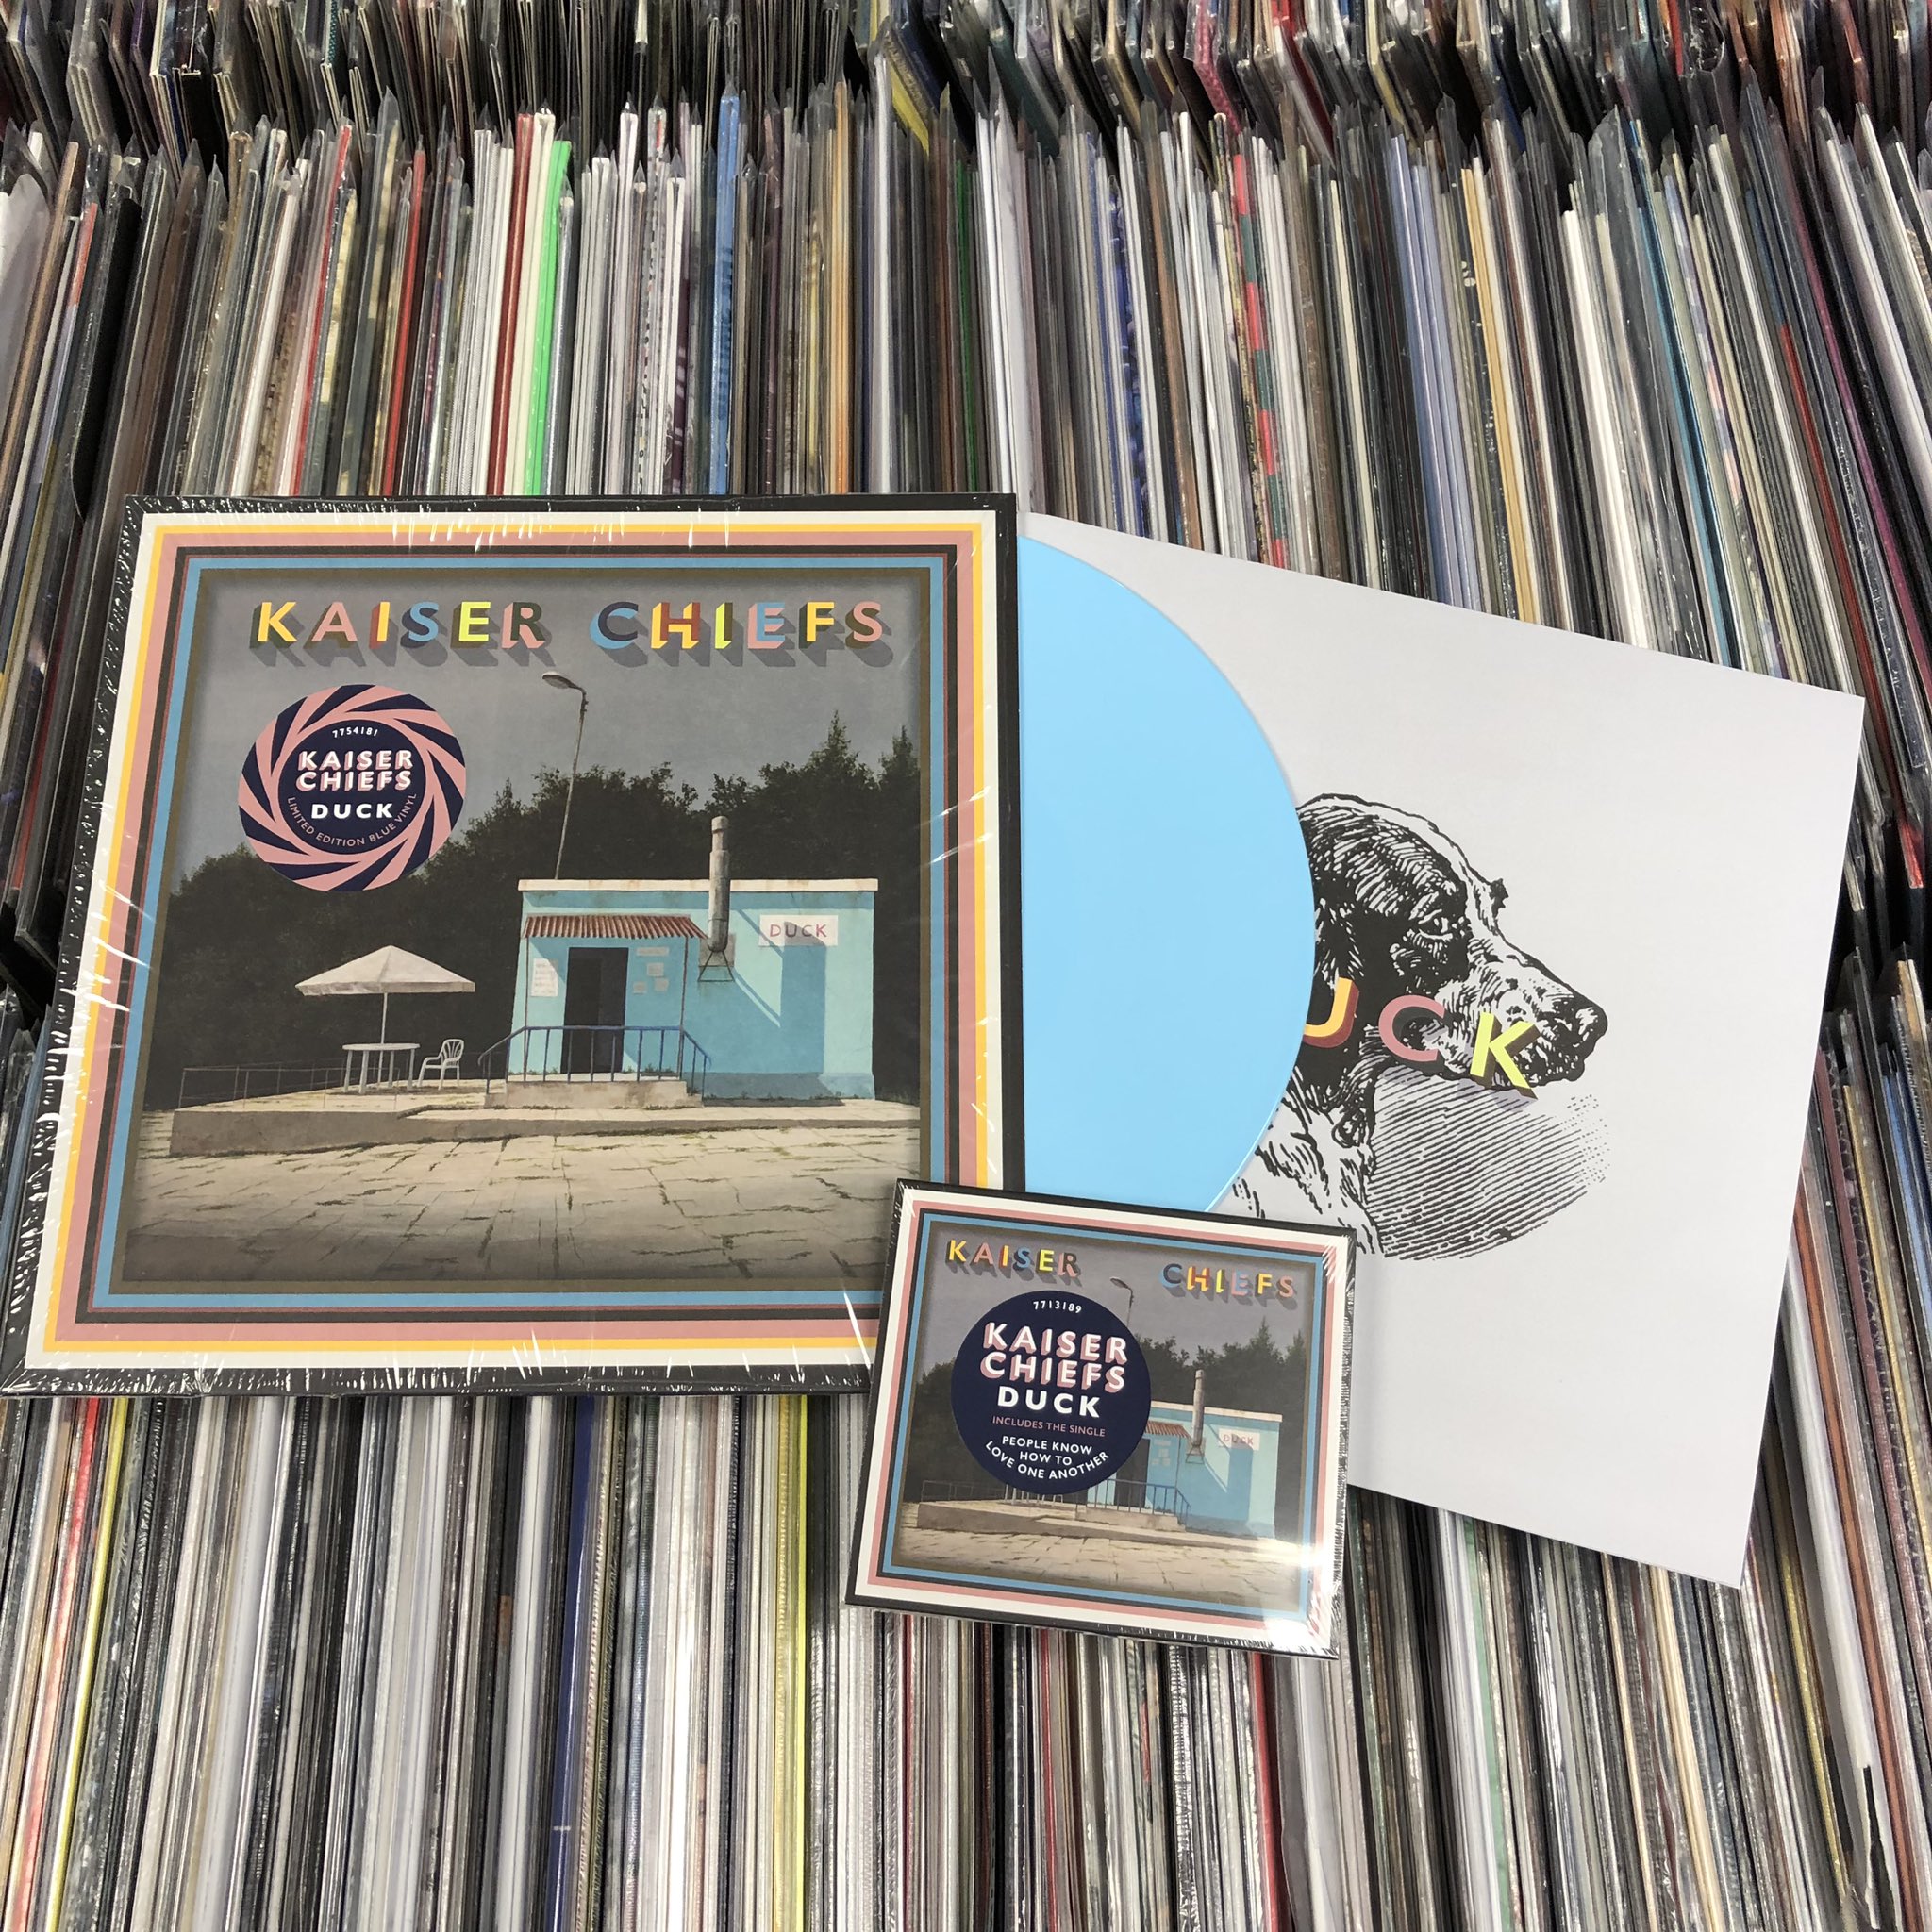 Music Twitterissä: "TODAY! Chiefs - Duck CD LP *limited edition BLUE 7th album from indie rock royalty! undeniably fantastic and undeniably Kaiser Chiefs” says frontman and wallflocker Ricky